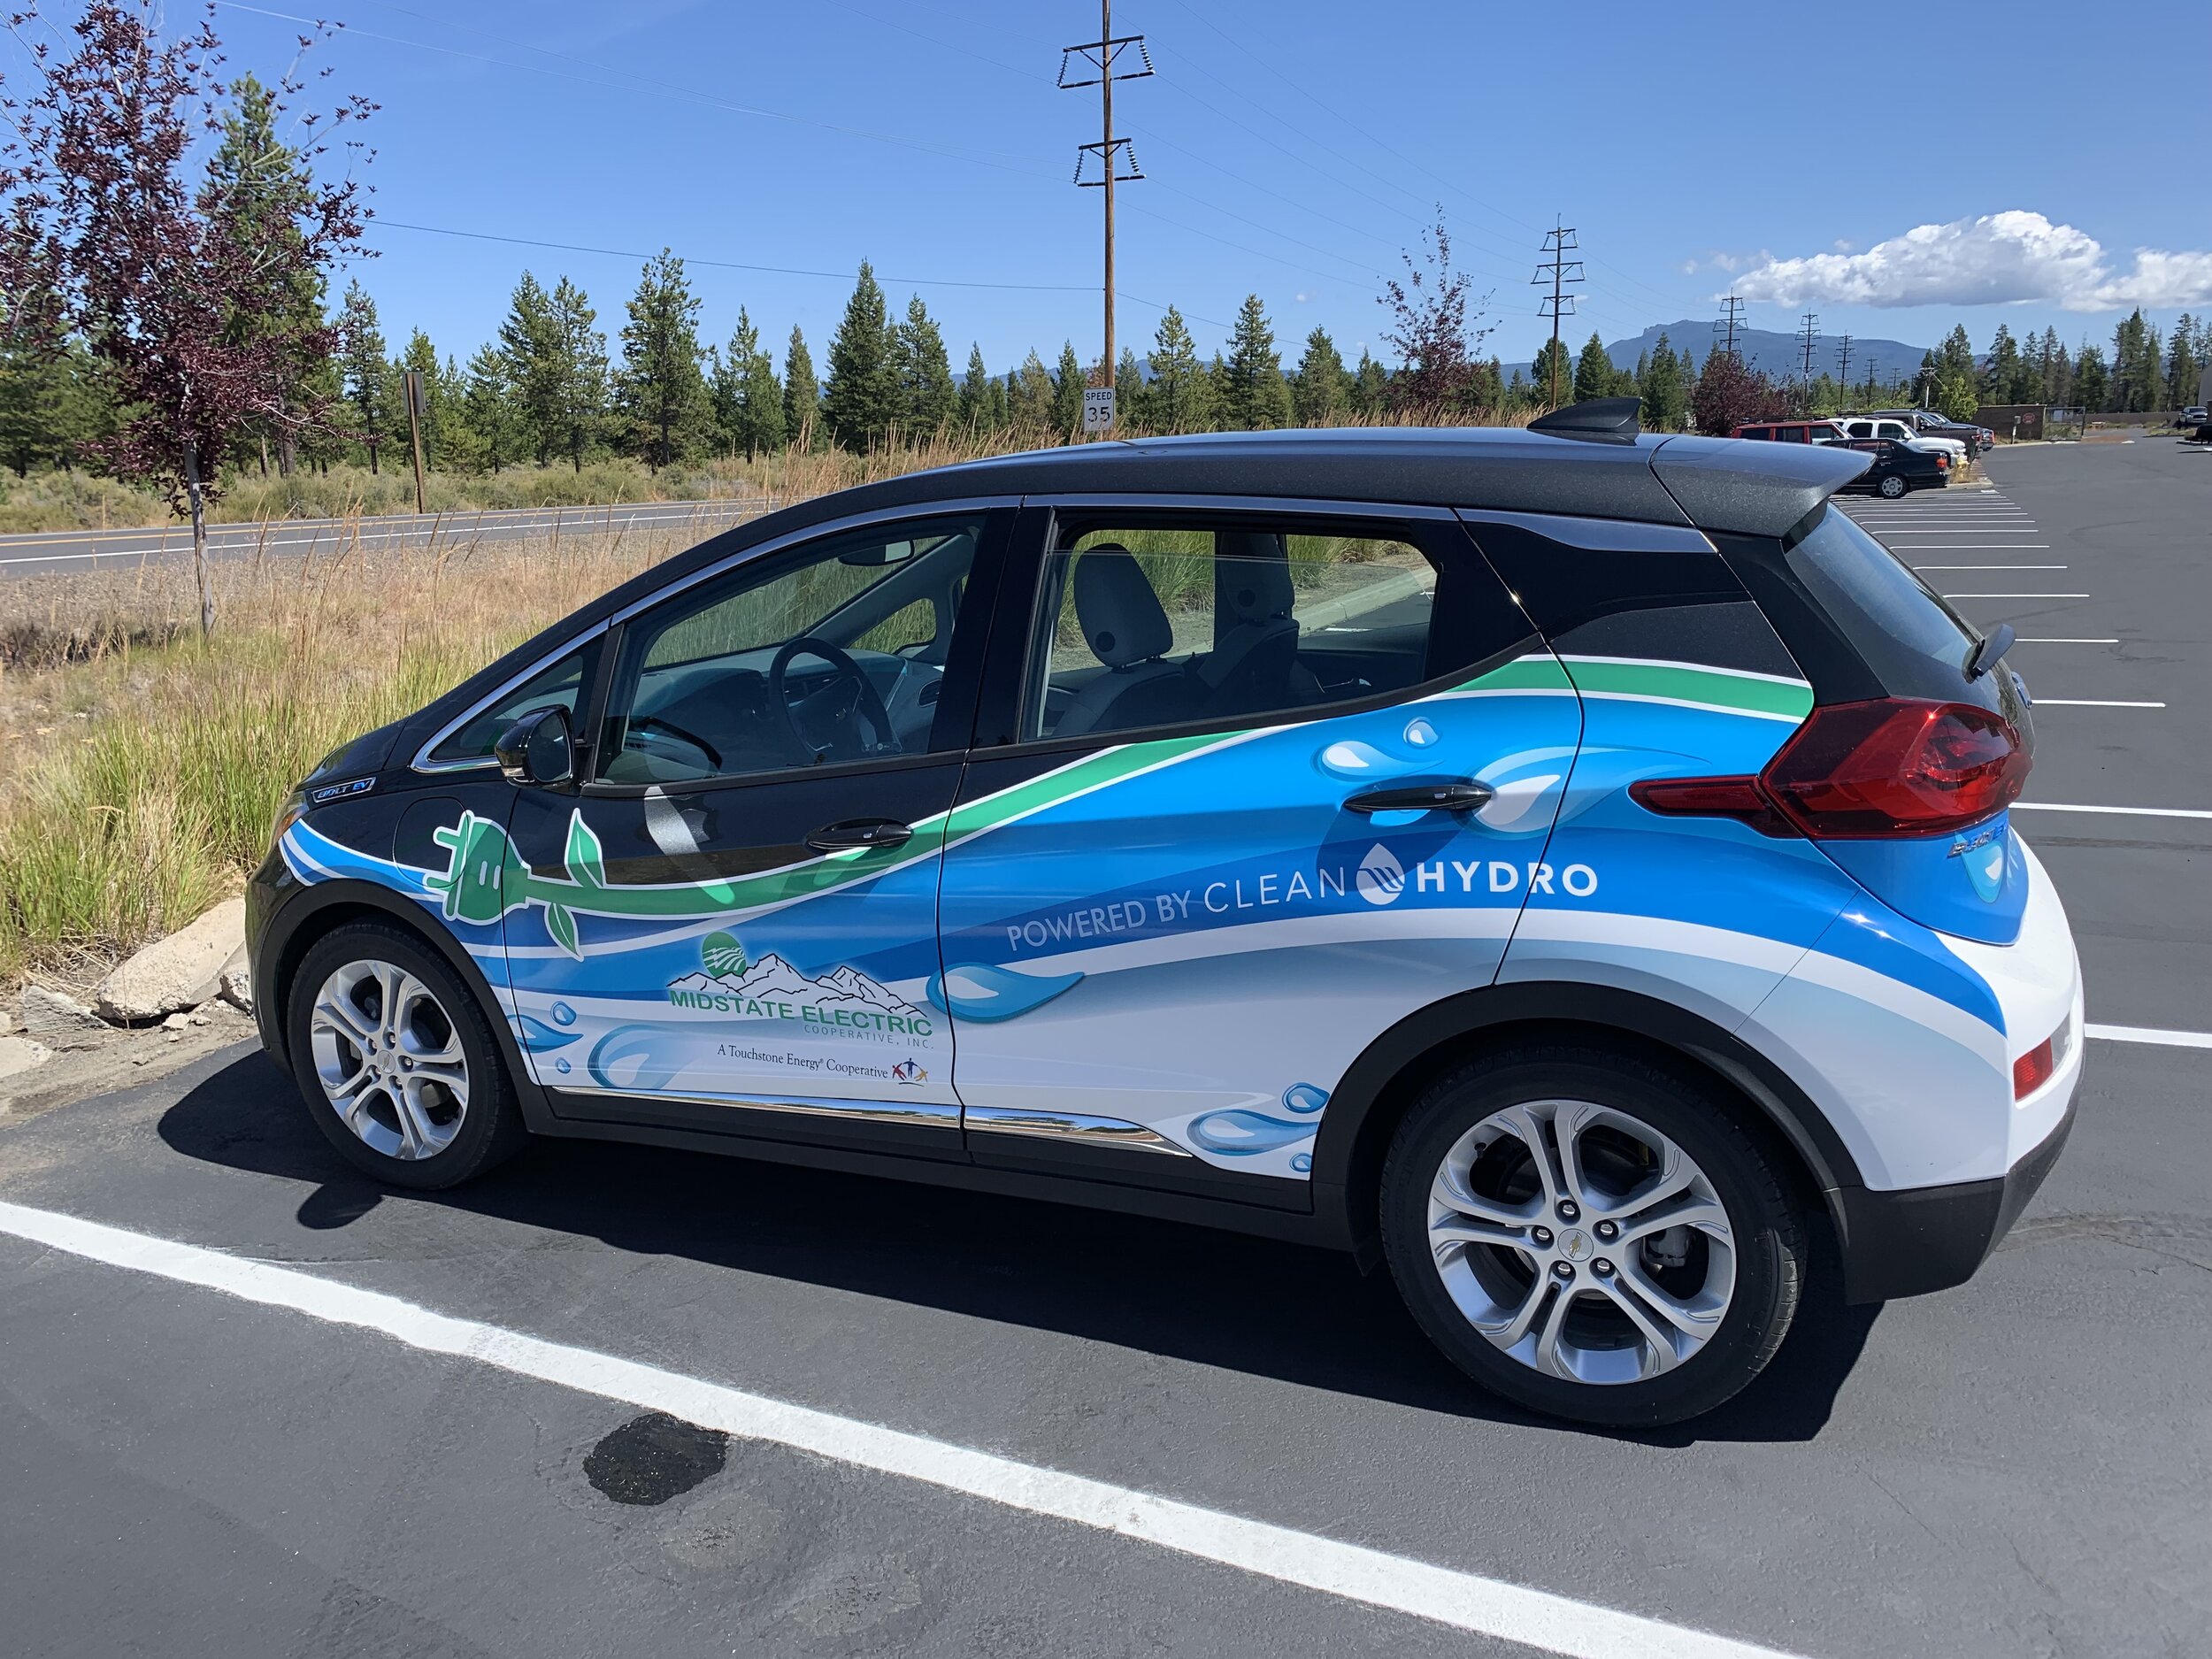 Midstate Electric Co-op's fleet includes this all-electric Chevy Bolt